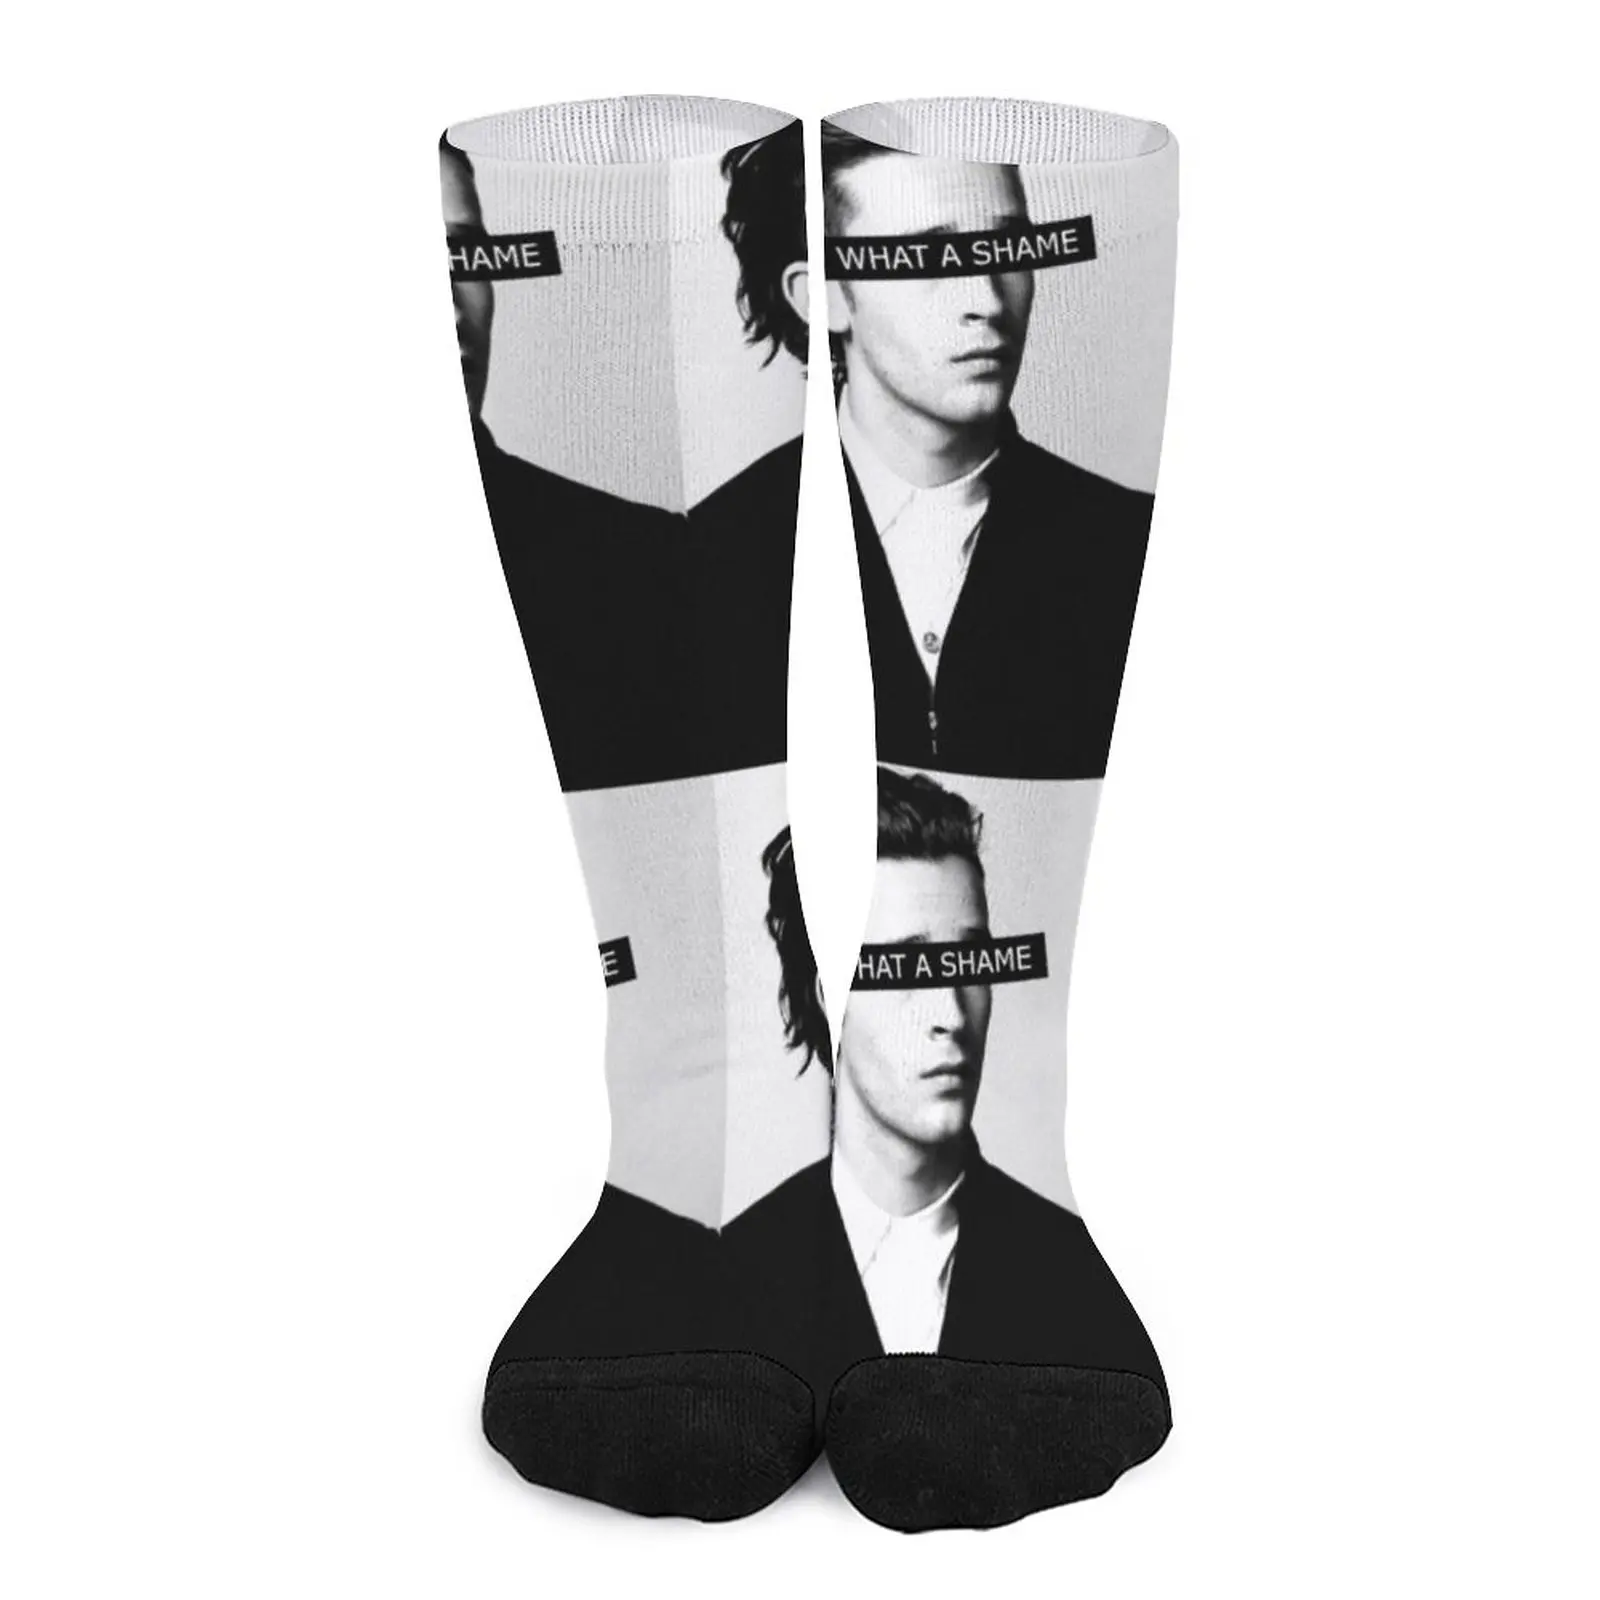 WHAT A SHAME - Matty Healy of The 1975 Socks happy socks Wholesale presley lisa marie now what 1 cd